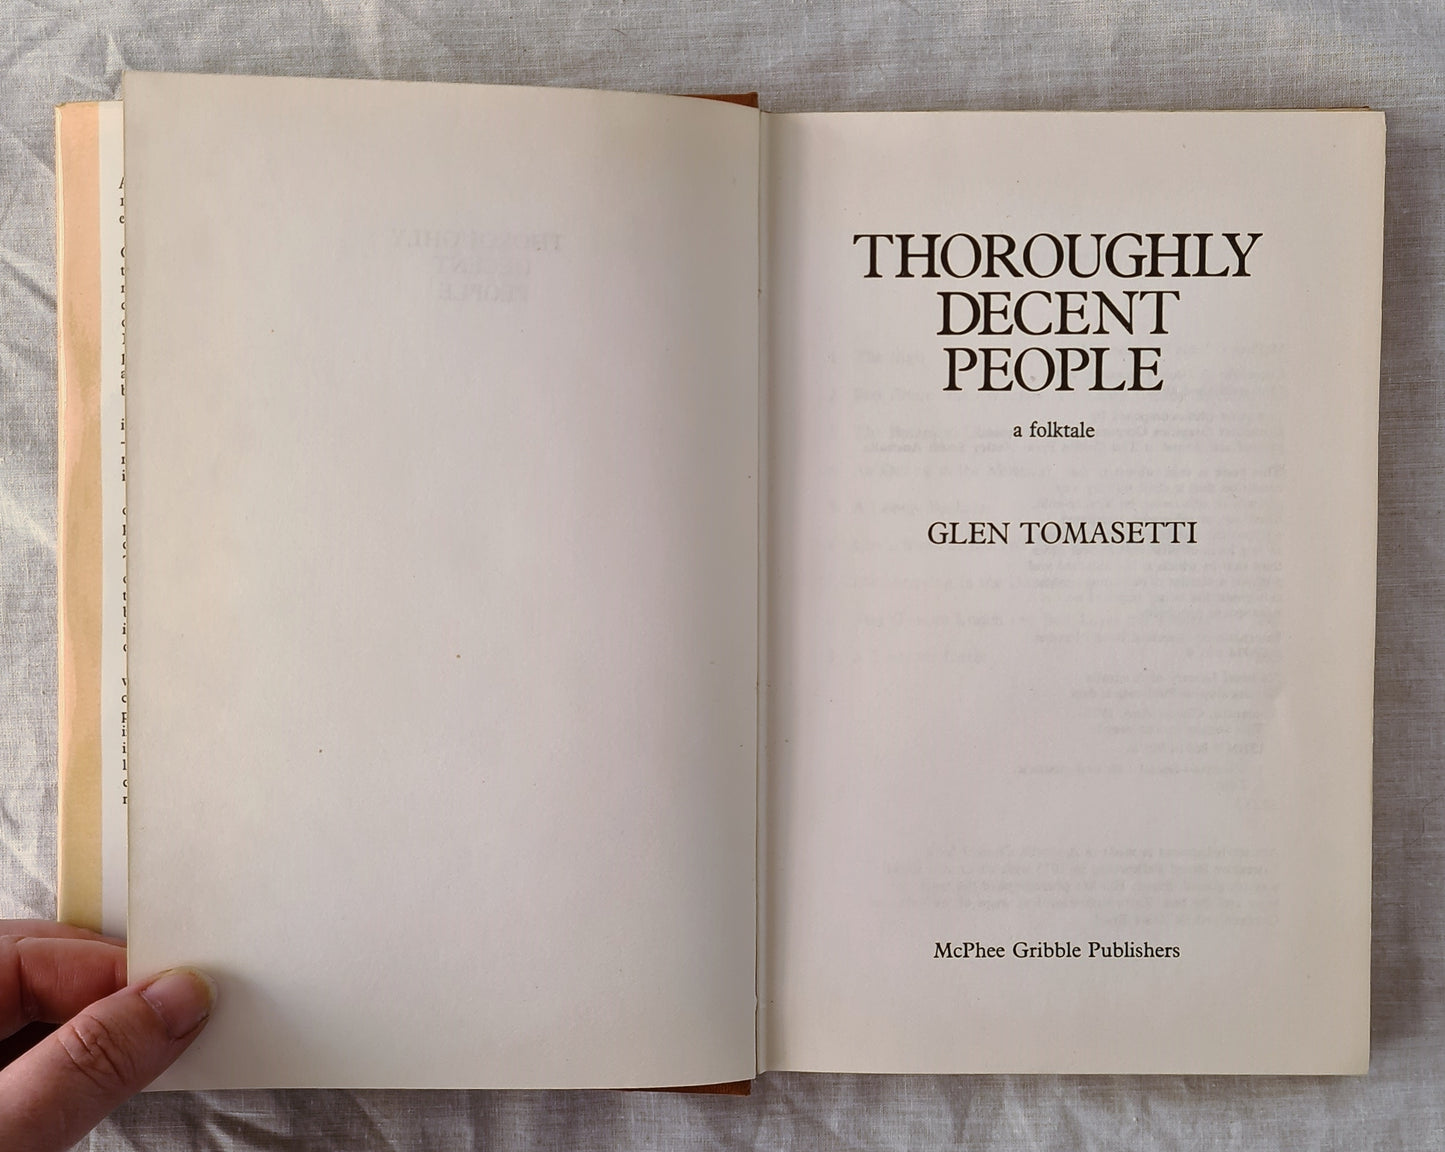 Thoroughly Decent People by Glen Tomasetti